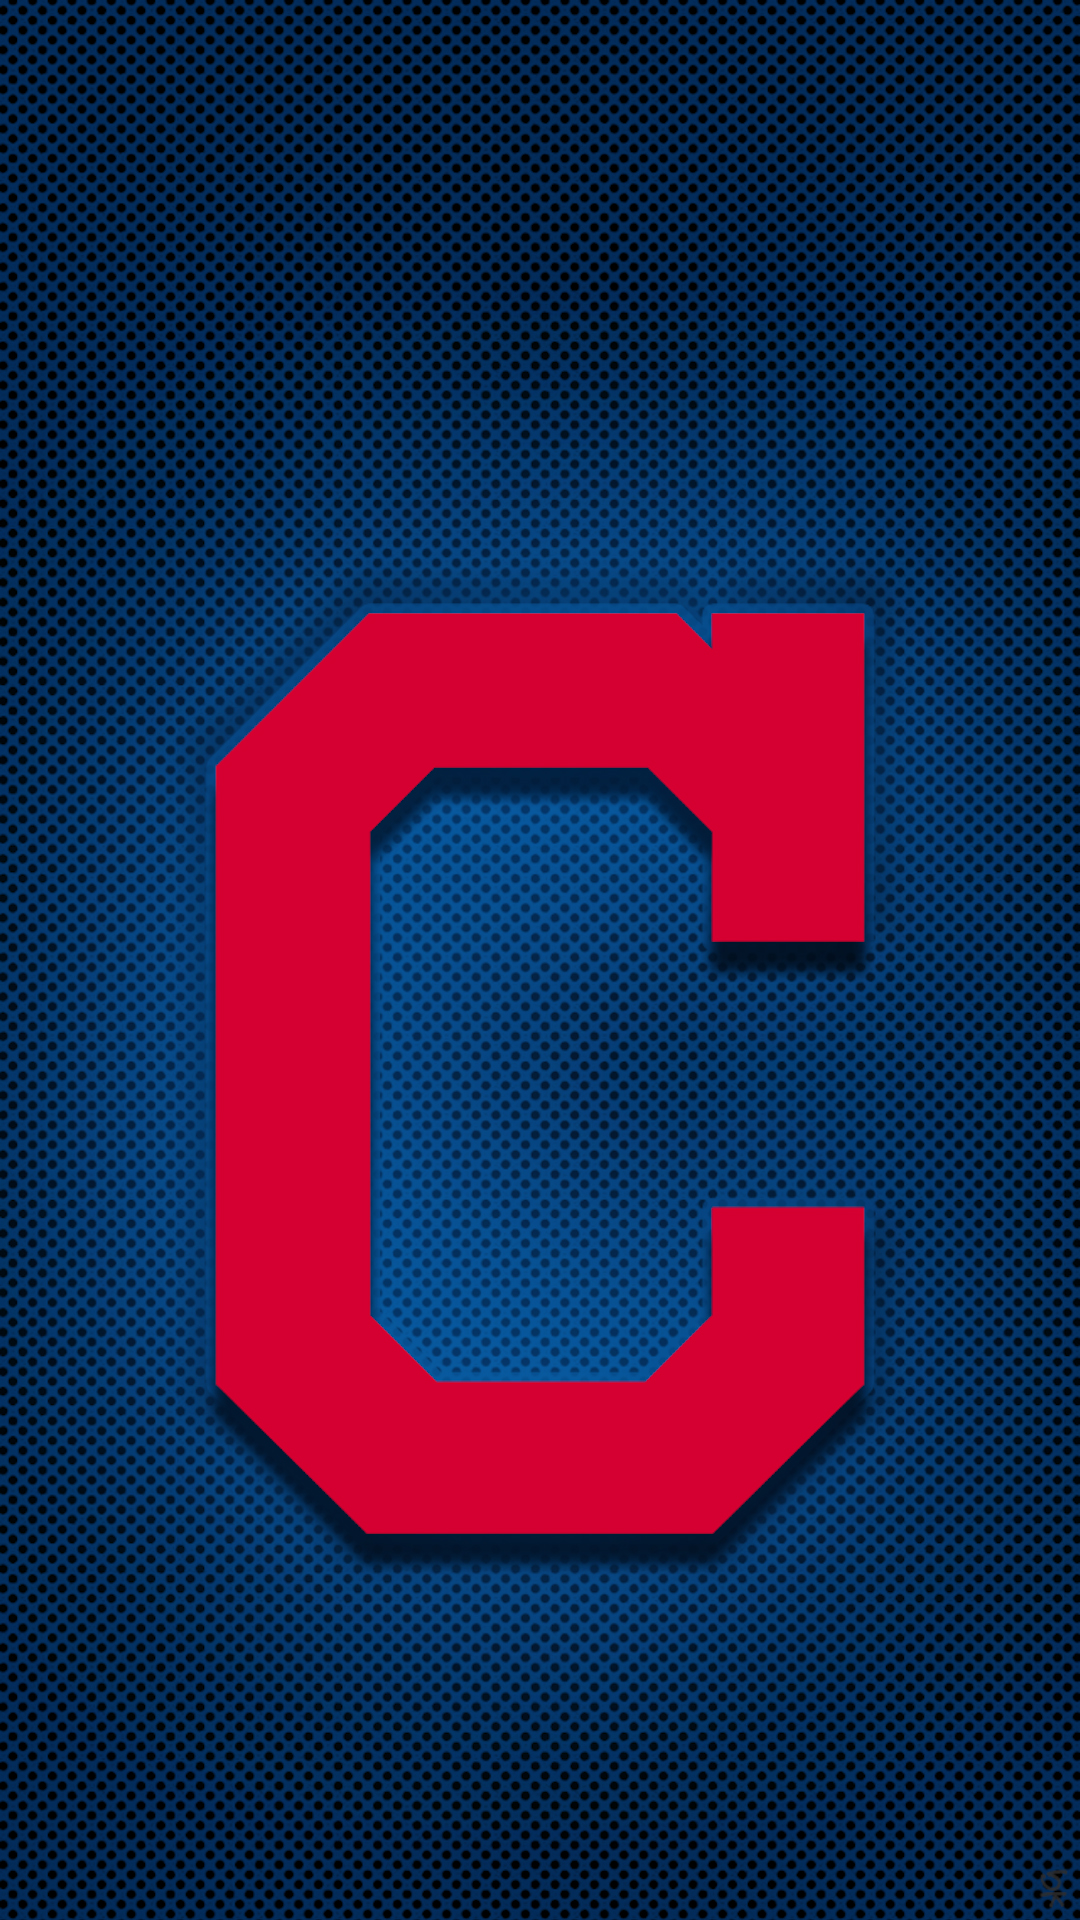 Cleveland Indians HD Wallpaper Image In Collection